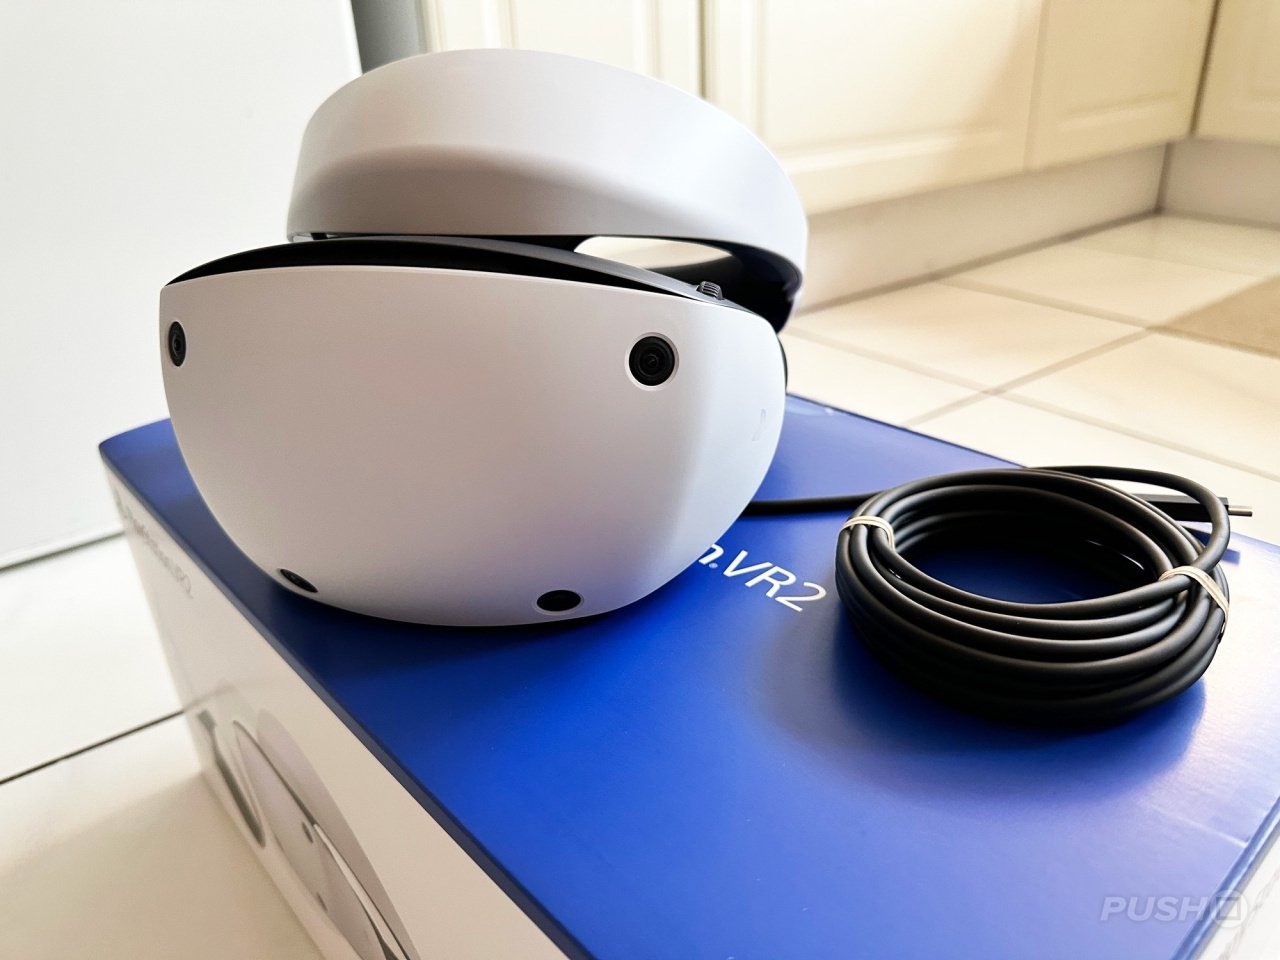 PSVR 2 PC support very unlikely in coming years, says developer